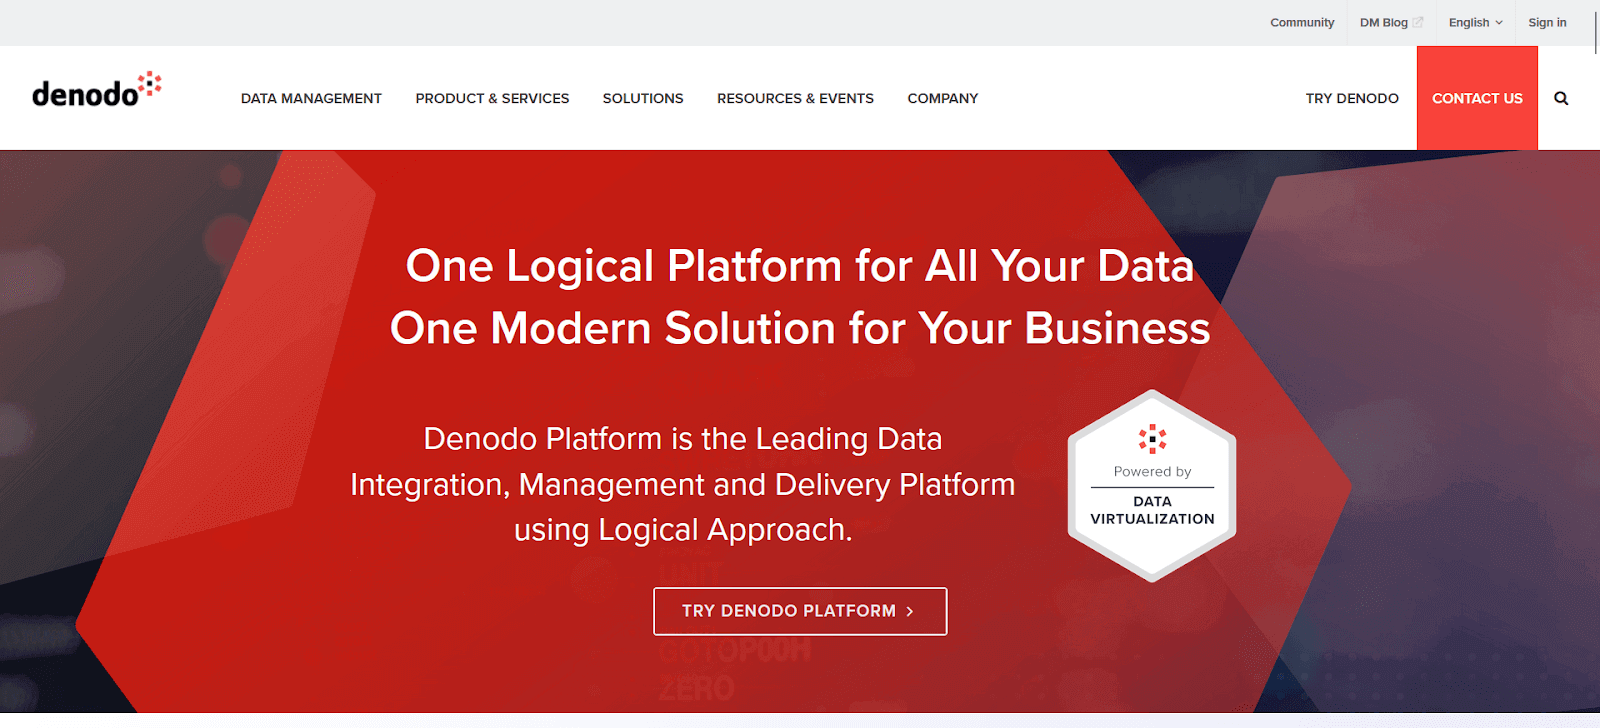 Denodo is a key player in the data management software